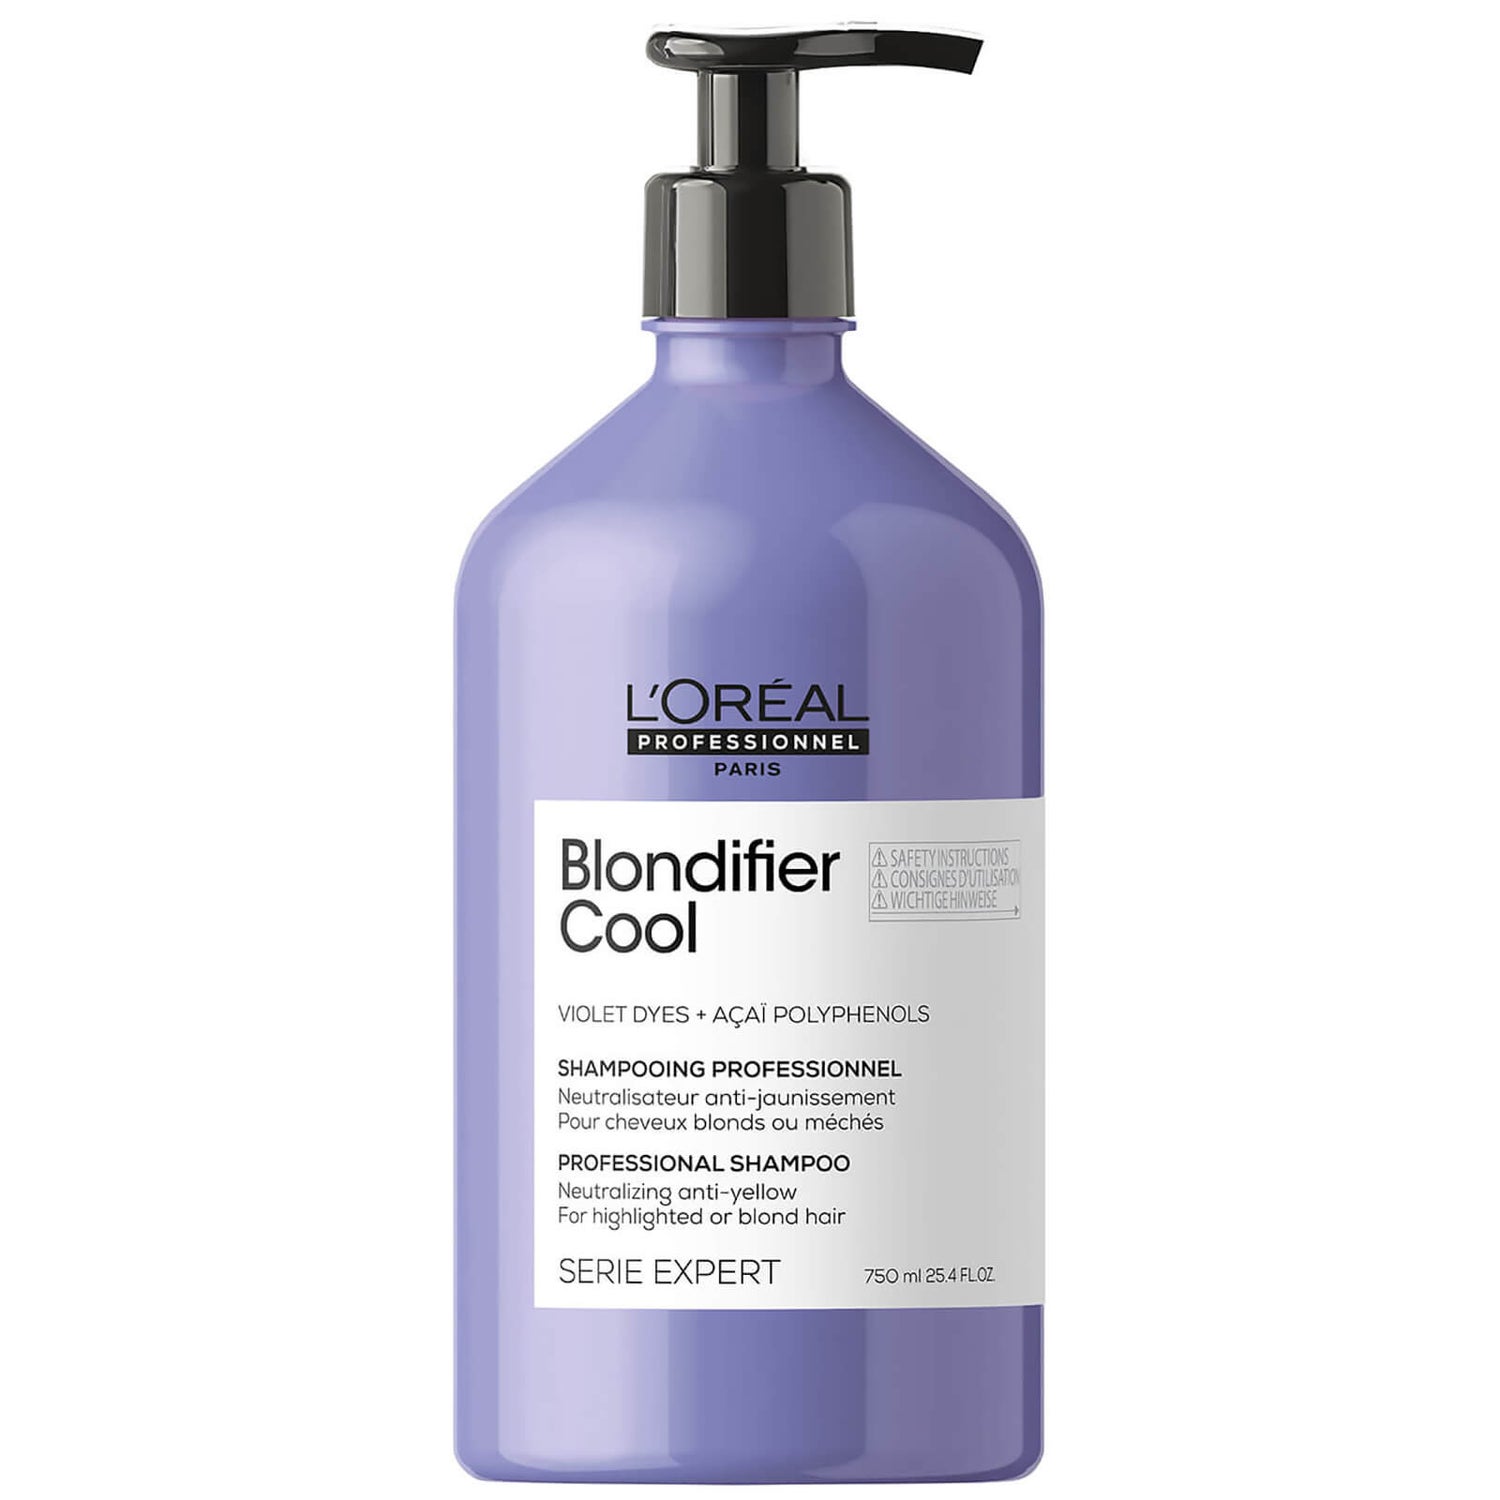 L’Oréal Professionnel Serie Expert Blondifier Cool Shampoo for Highlighted or Blonde Hair -shampoo, 750 ml